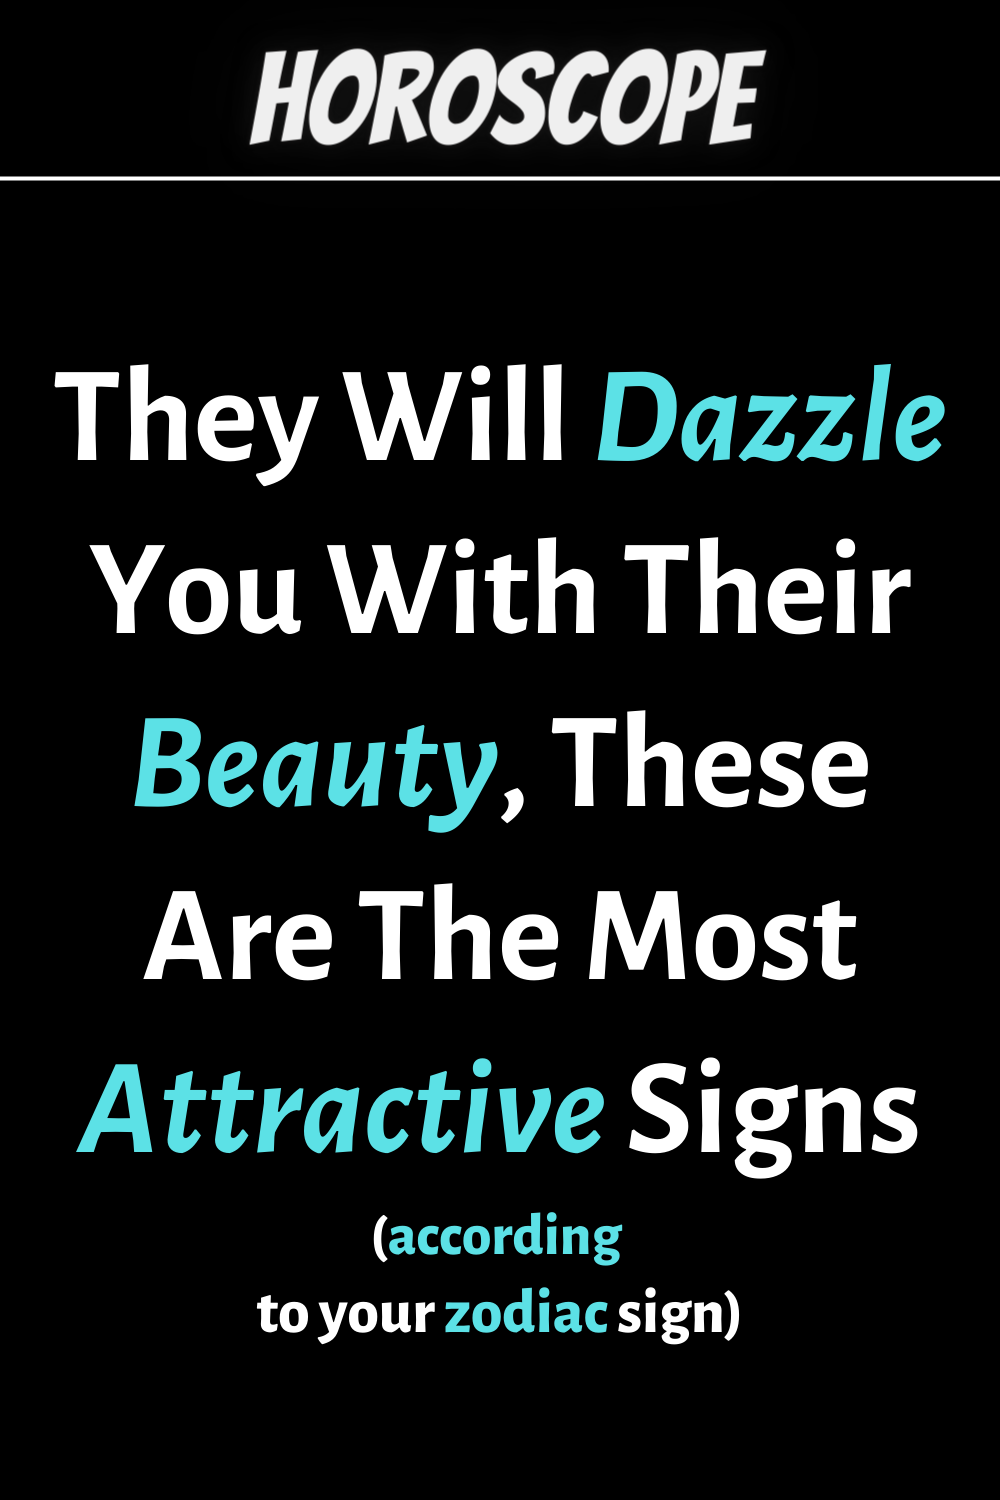 These Are The Most Attractive Signs